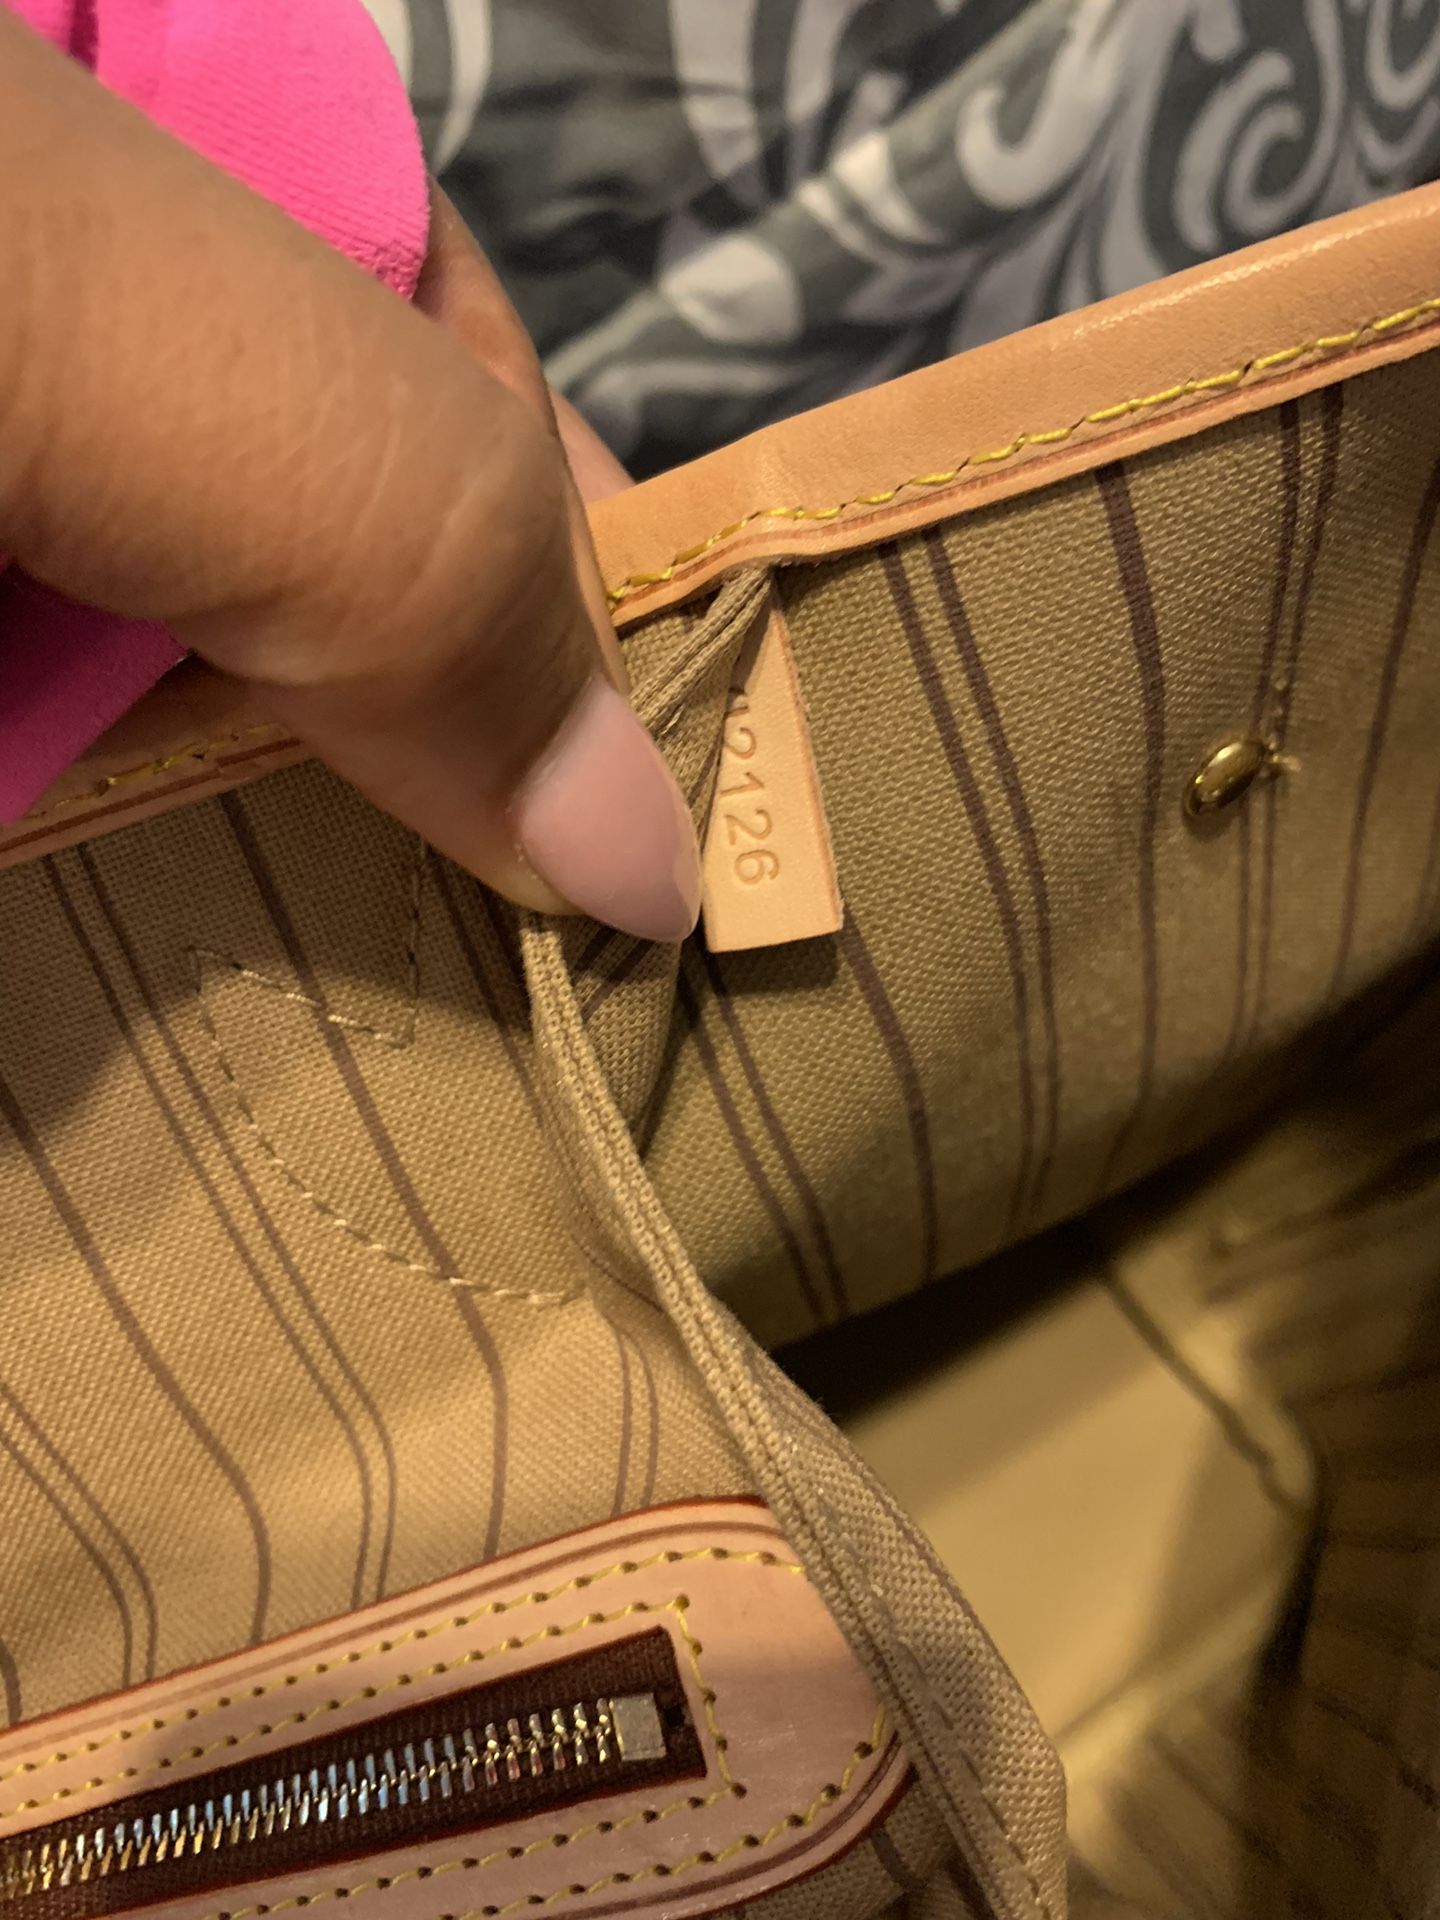 Authentic Louis Vuitton Tournelle MM bag for Sale in Allentown, PA - OfferUp